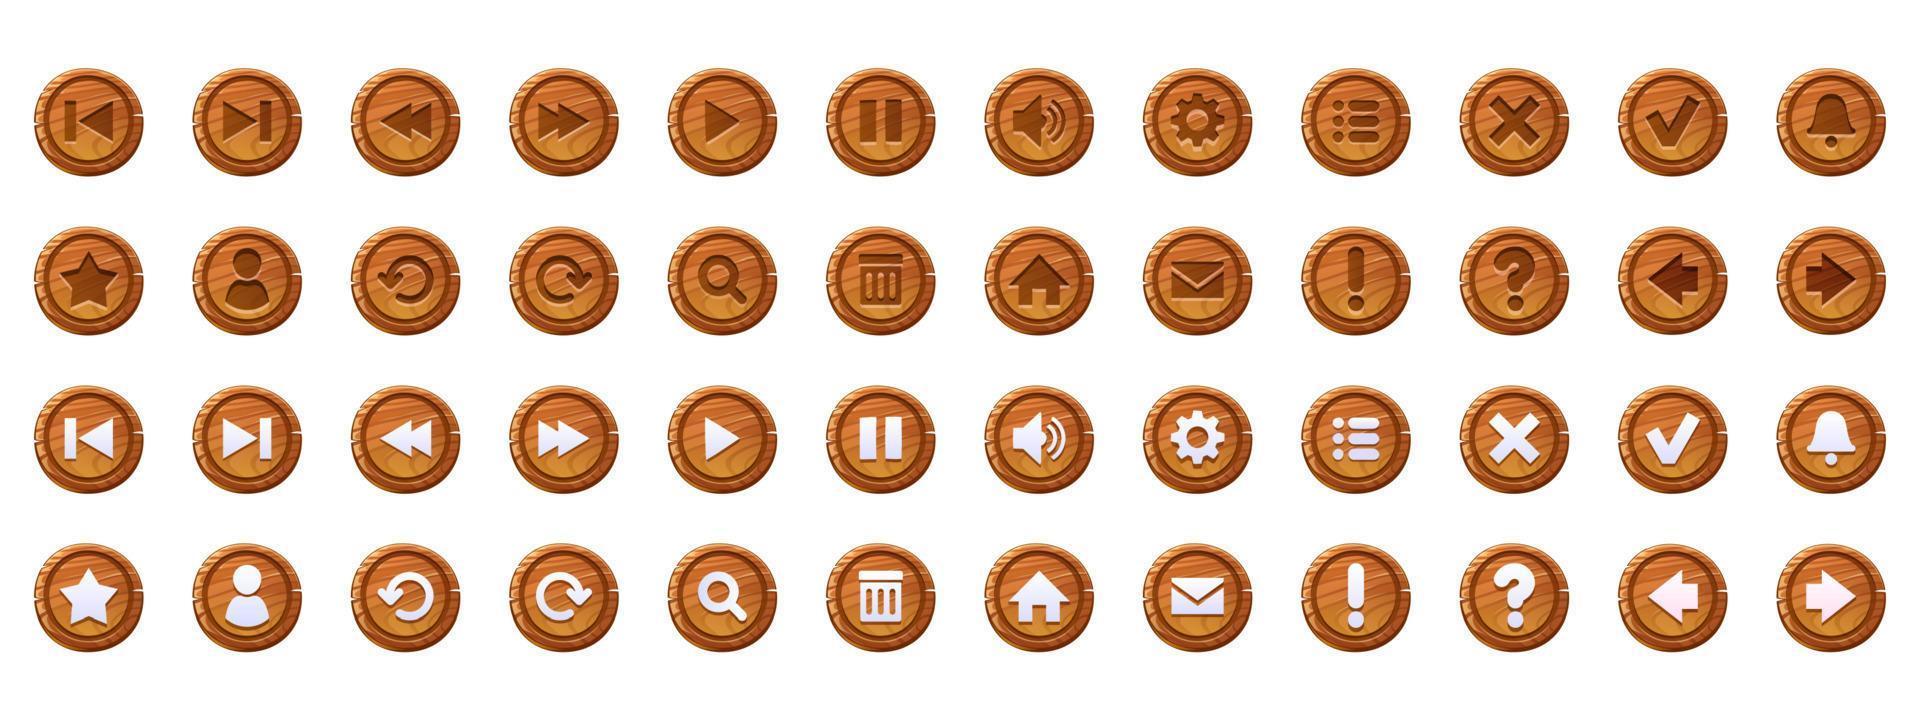 Circle buttons with wooden texture and icons vector